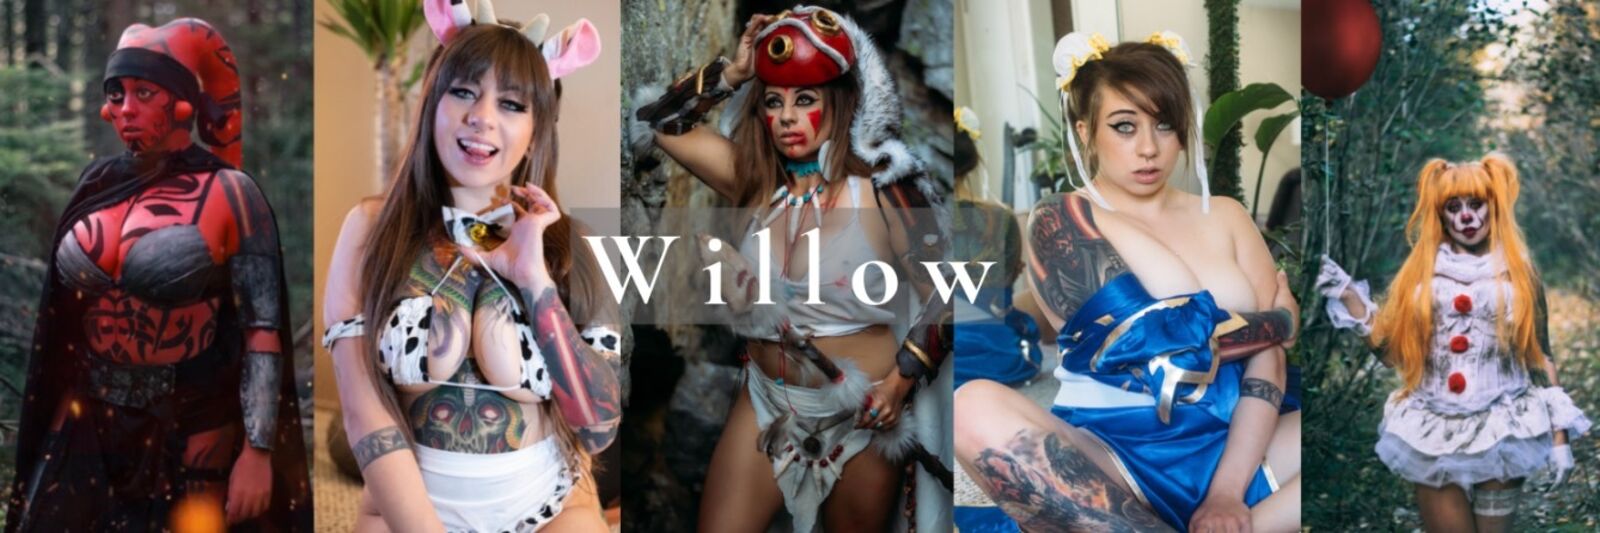 See Willow profile